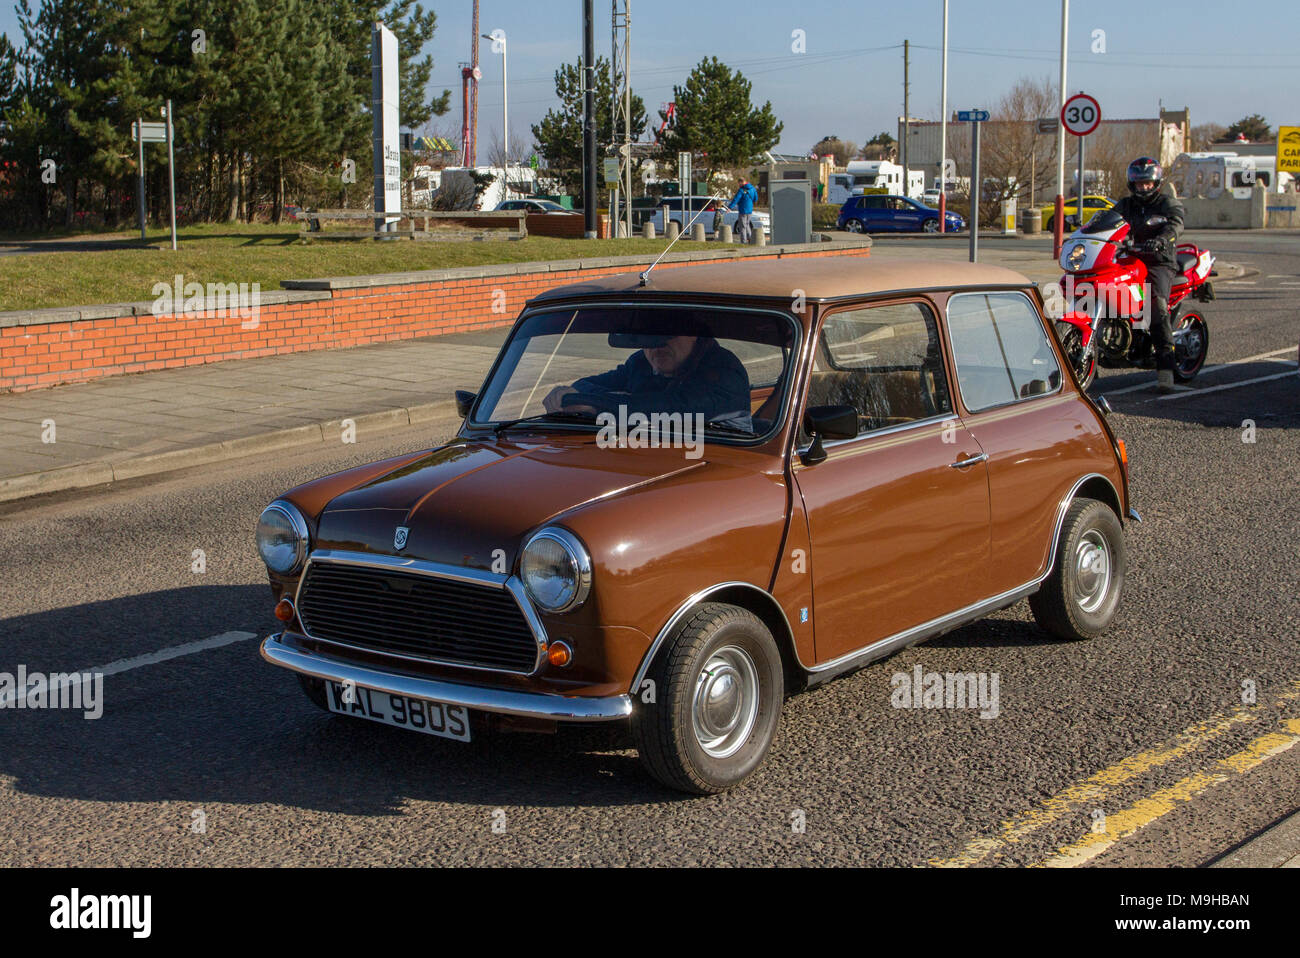 1978 70s brown Leyland mini 1000 at then North-West Supercar event as  1970s cars and tourists arrive in the coastal resort of Southport, on a warm spring day. SuperCars are bumper to bumper on the seafront esplanade as classic & 70s vintage car enthusiasts enjoy a motoring day out. Stock Photo